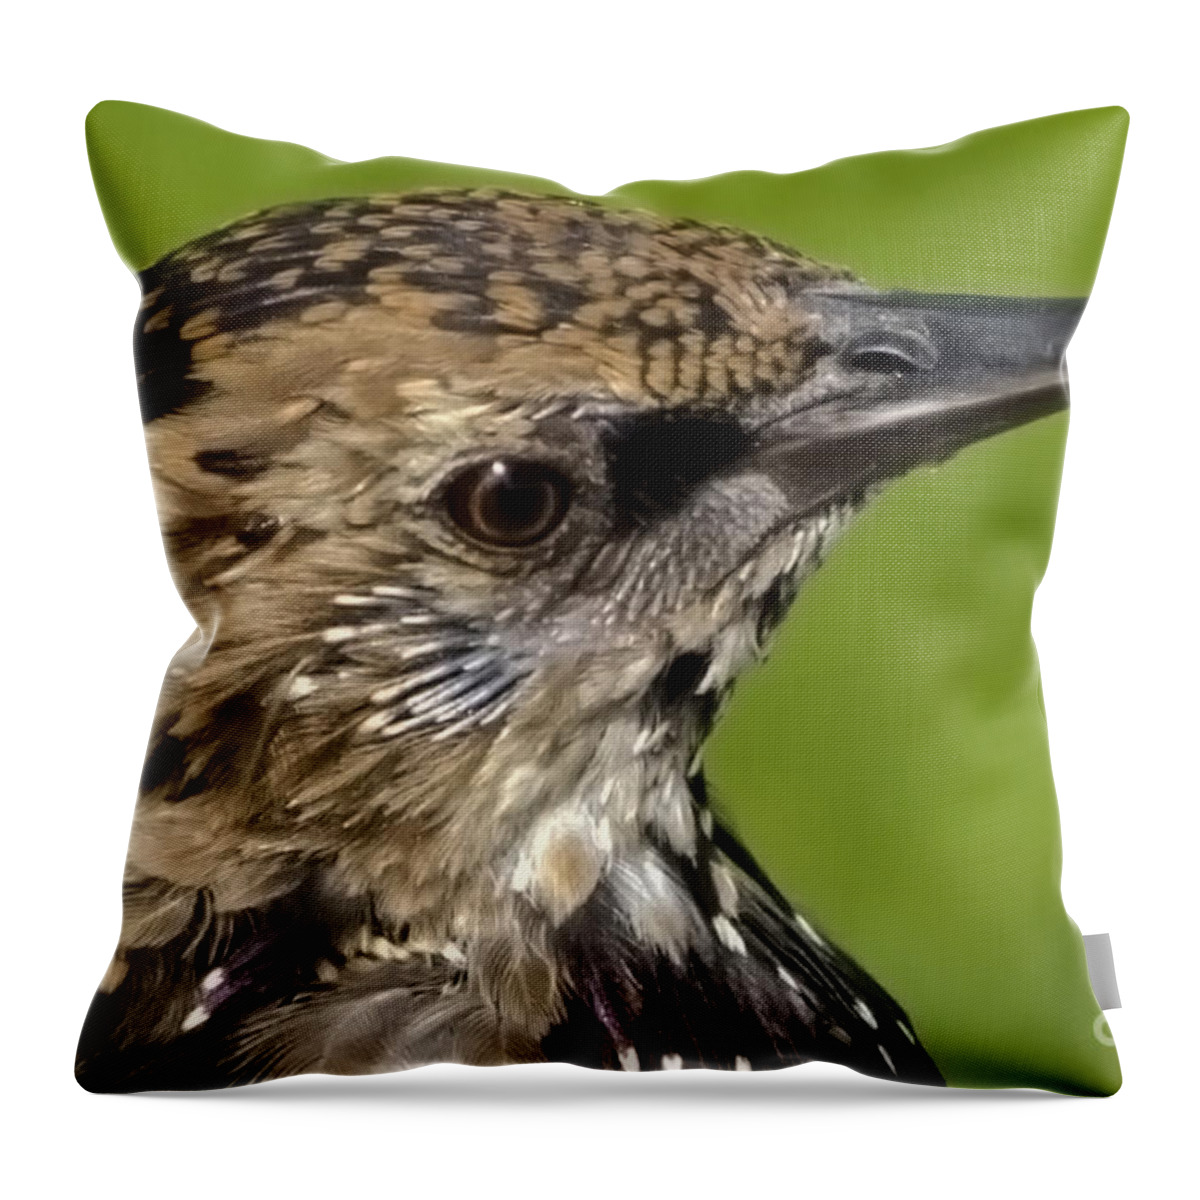 Starling Throw Pillow featuring the photograph Starling Profile by Linsey Williams